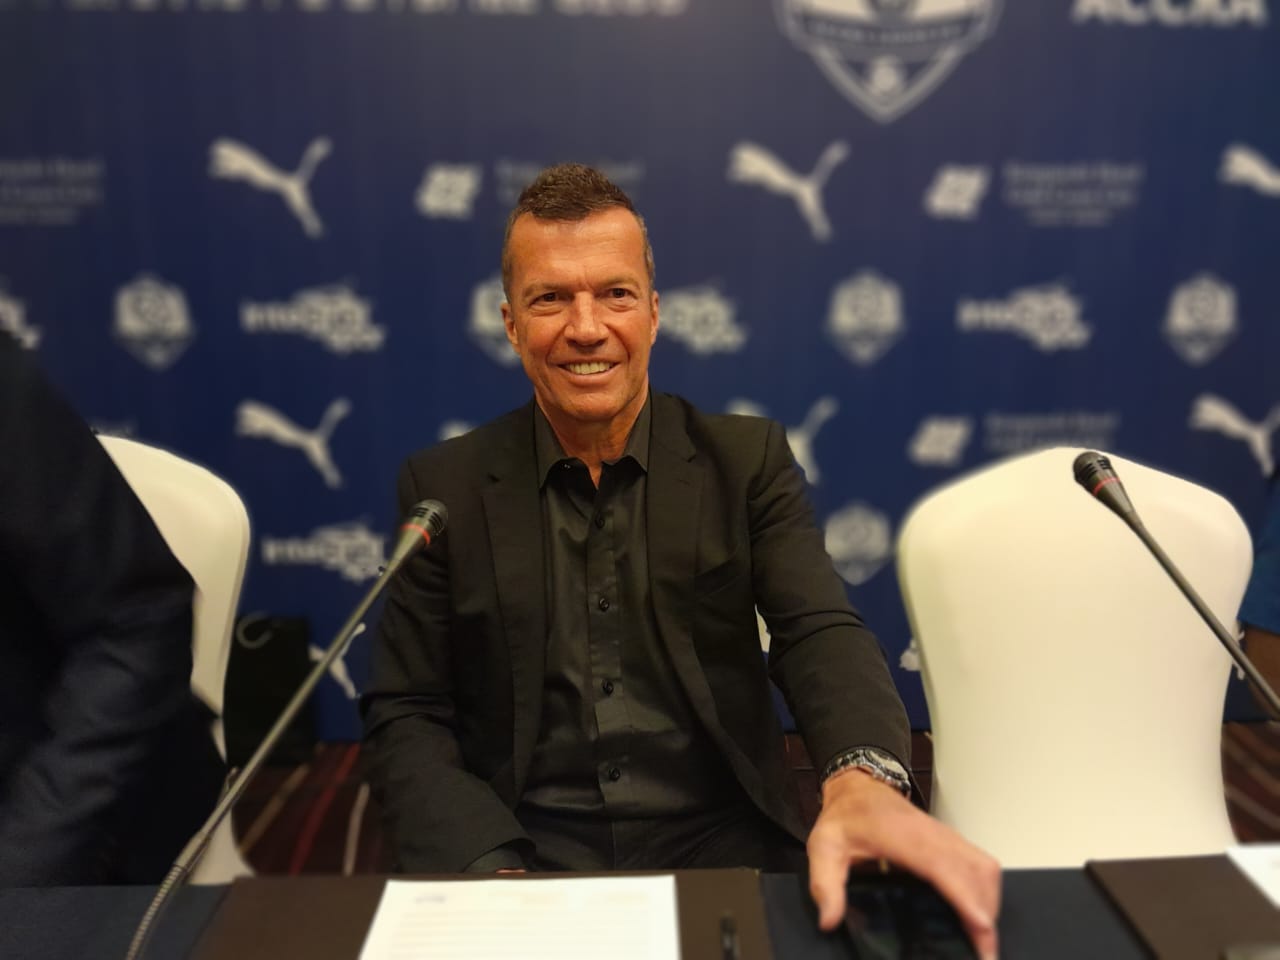 German legend Lothar Matthäus insists it is a dream to invest in African football